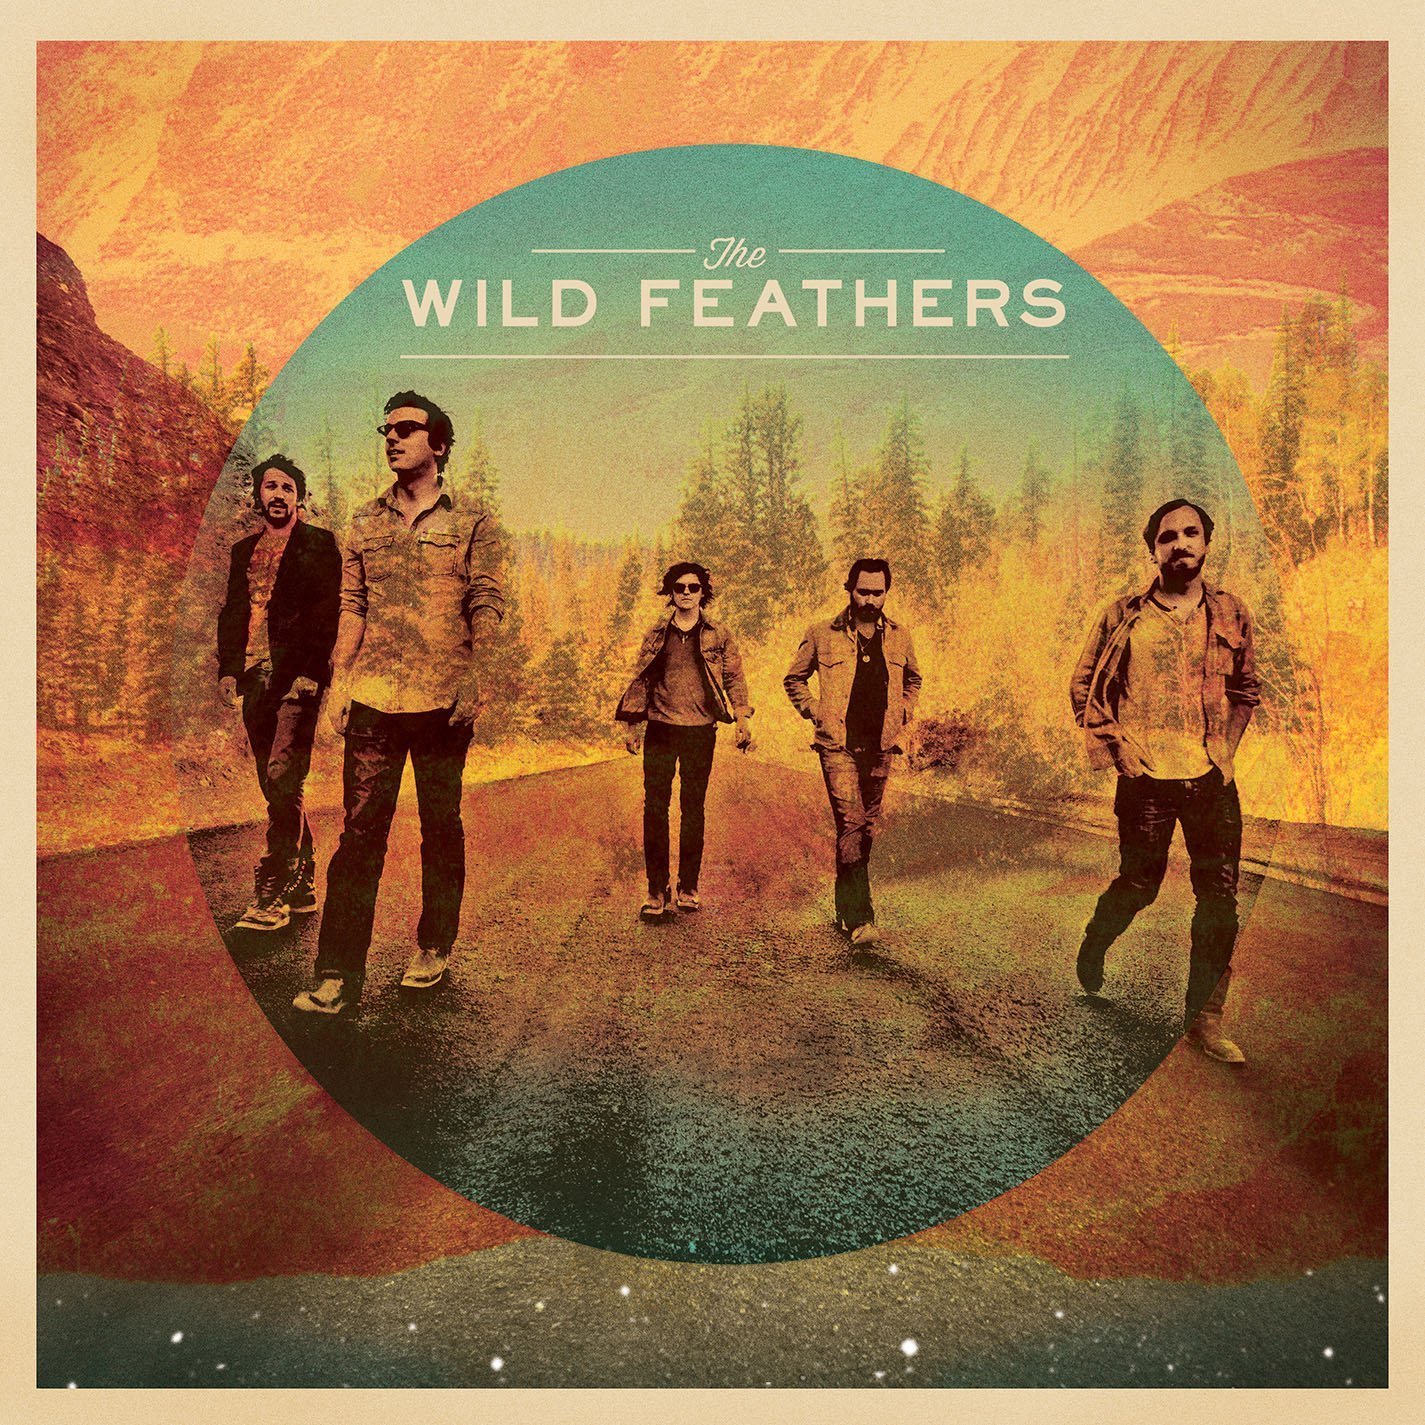 The Wild Feathers - The Wild Feathers (2013) FLAC Download